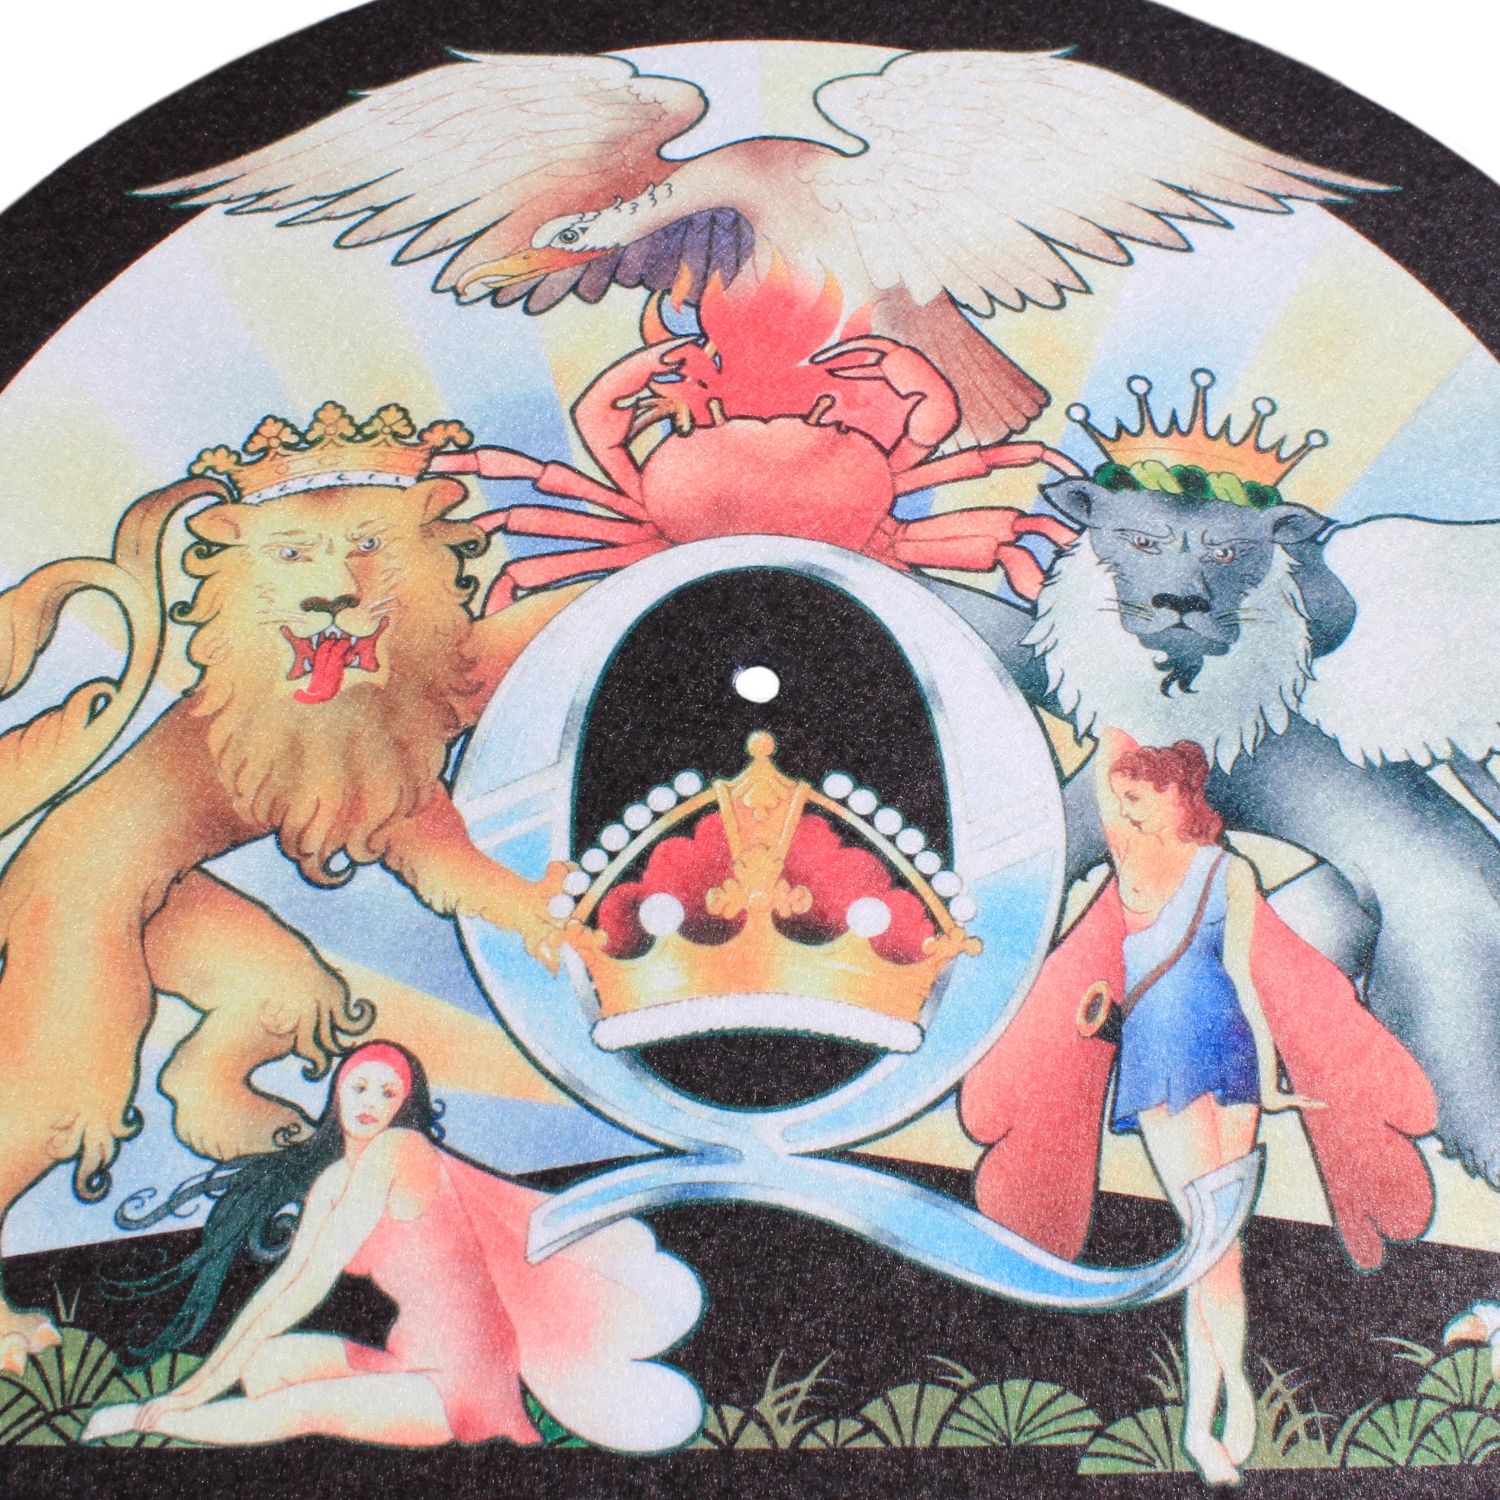 Queen - A Day At The Races Slip Mat